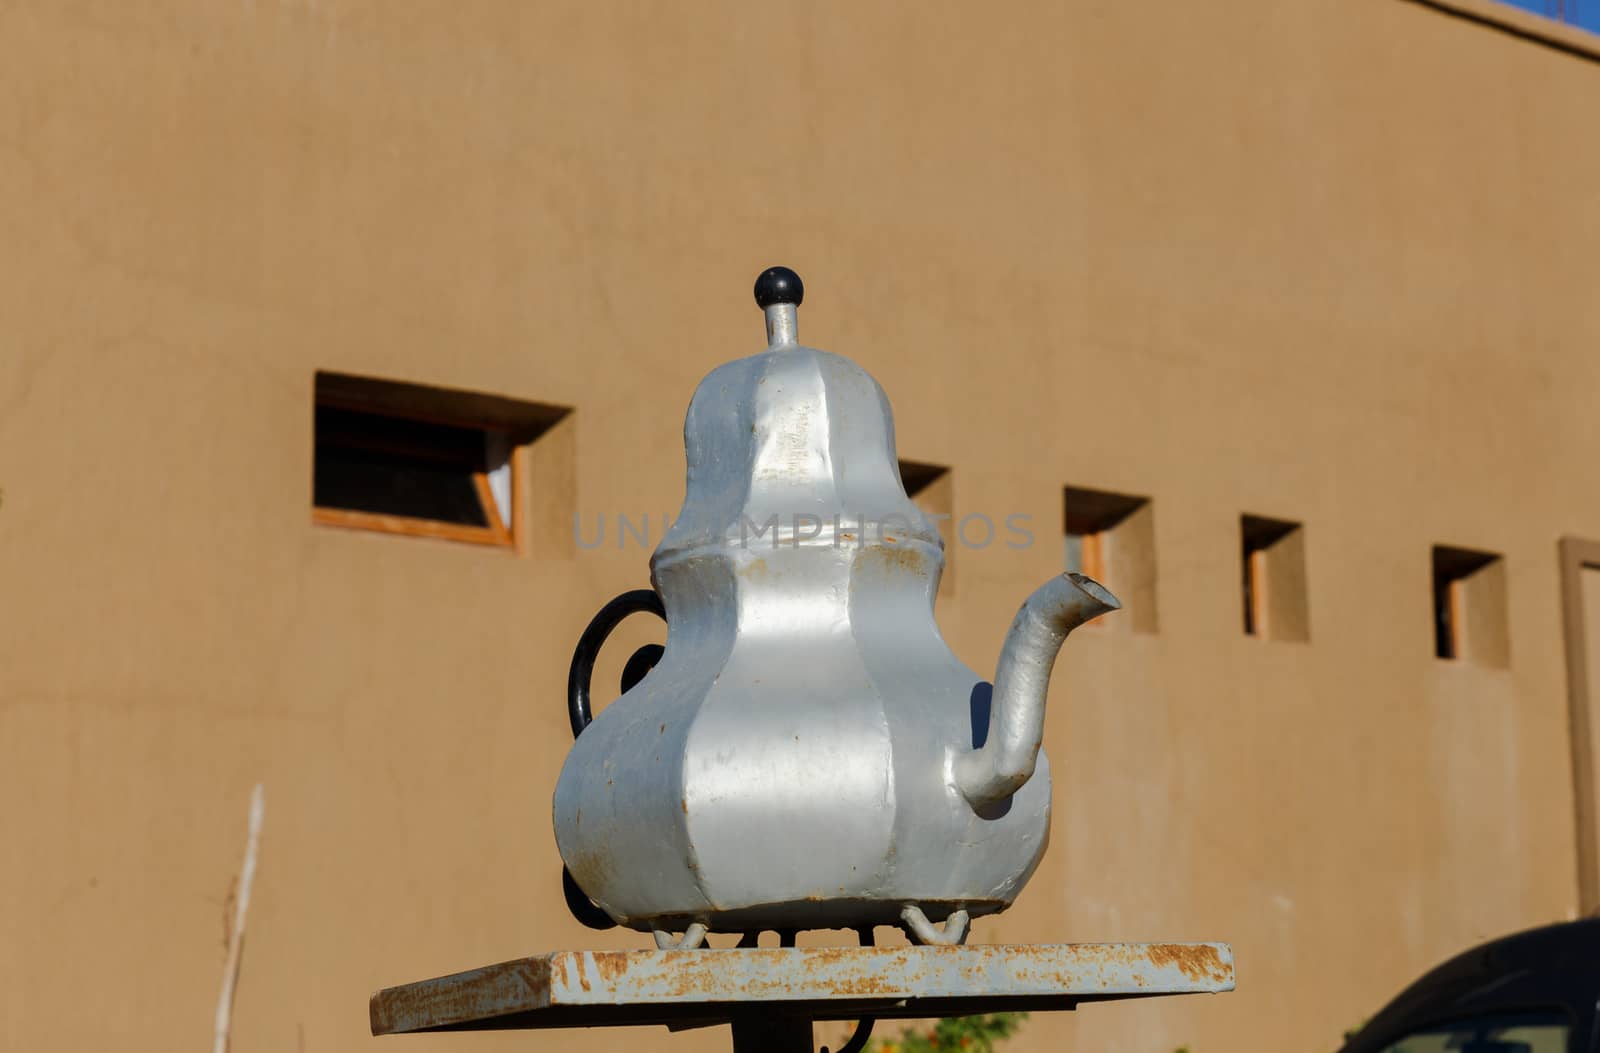 traditional Moroccan kettle by Mieszko9